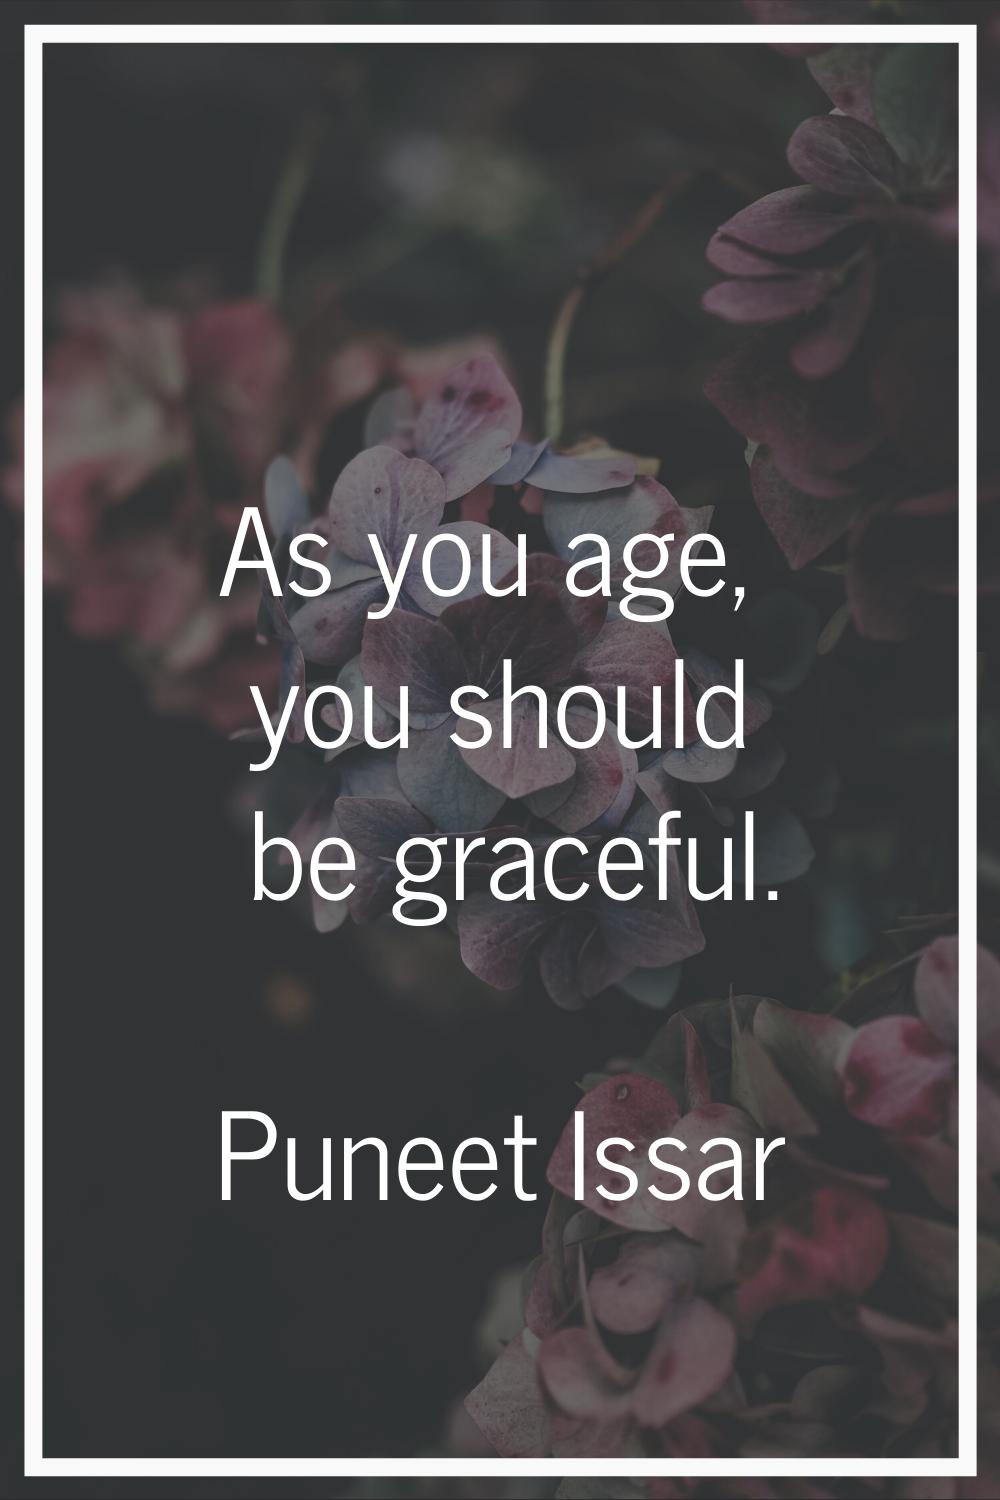 As you age, you should be graceful.